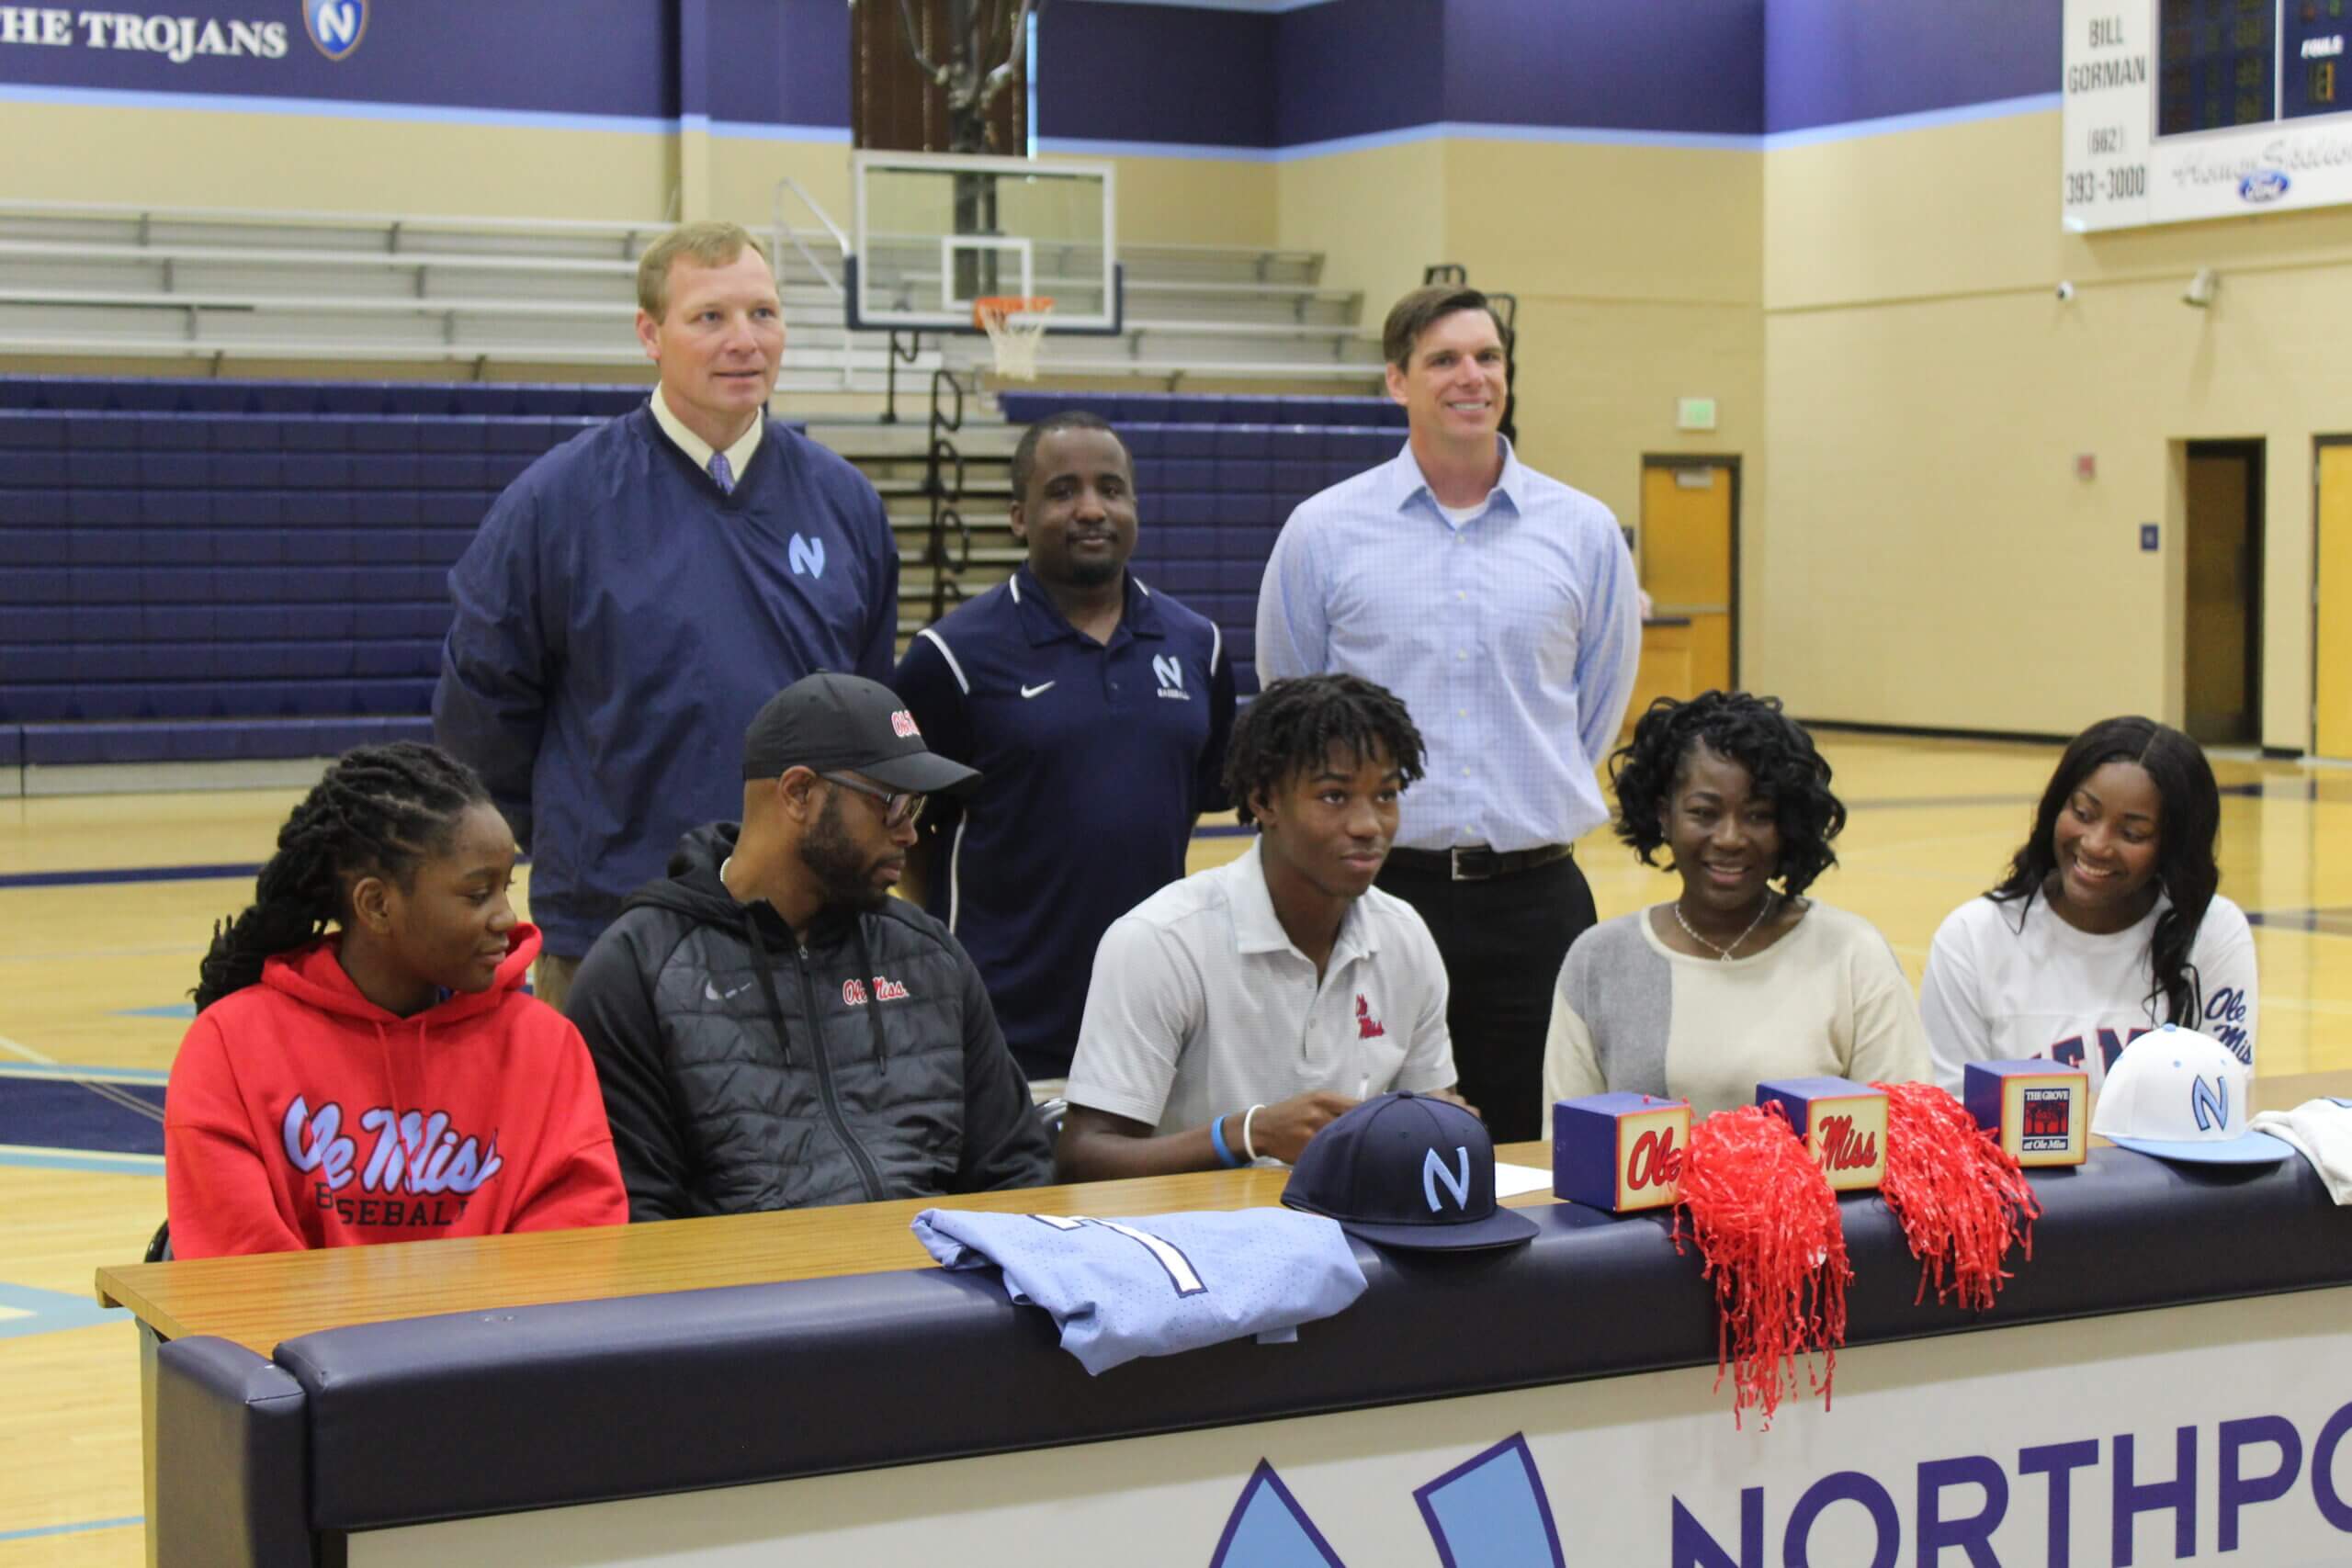 Northpoint's James Smith to play at Ole Miss